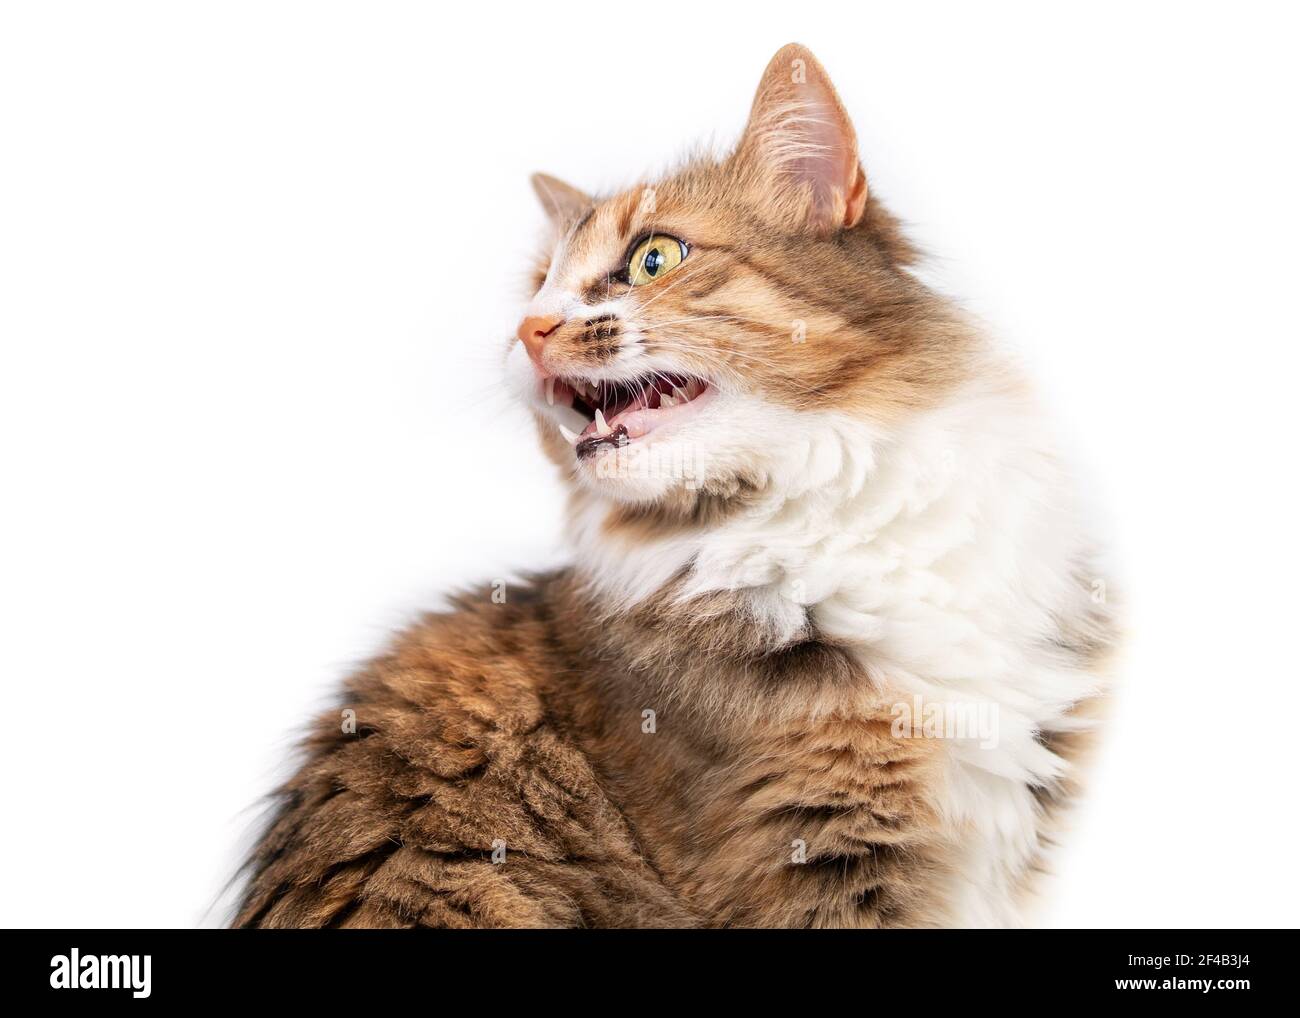 Cat chirping or chattering at something. Cute fluffy female kitty sitting and vocalizing with mouth wide open and visible teeth. Concept for why cats Stock Photo